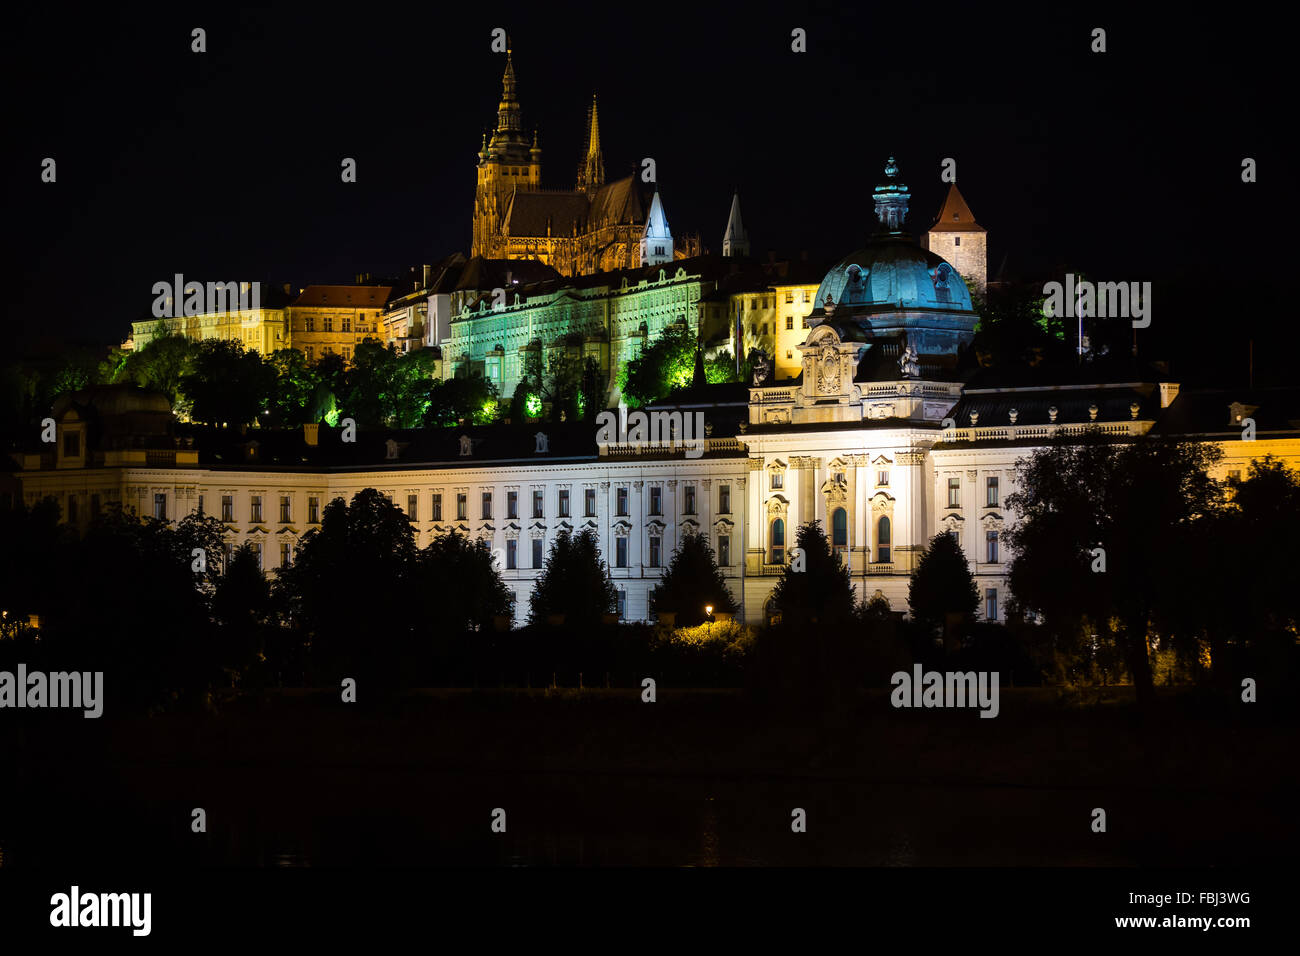 Tourism and sightseeing. Night landscape of Prague, illuminated architecture, St. Vitus Cathedral in the distance. View on Pragu Stock Photo